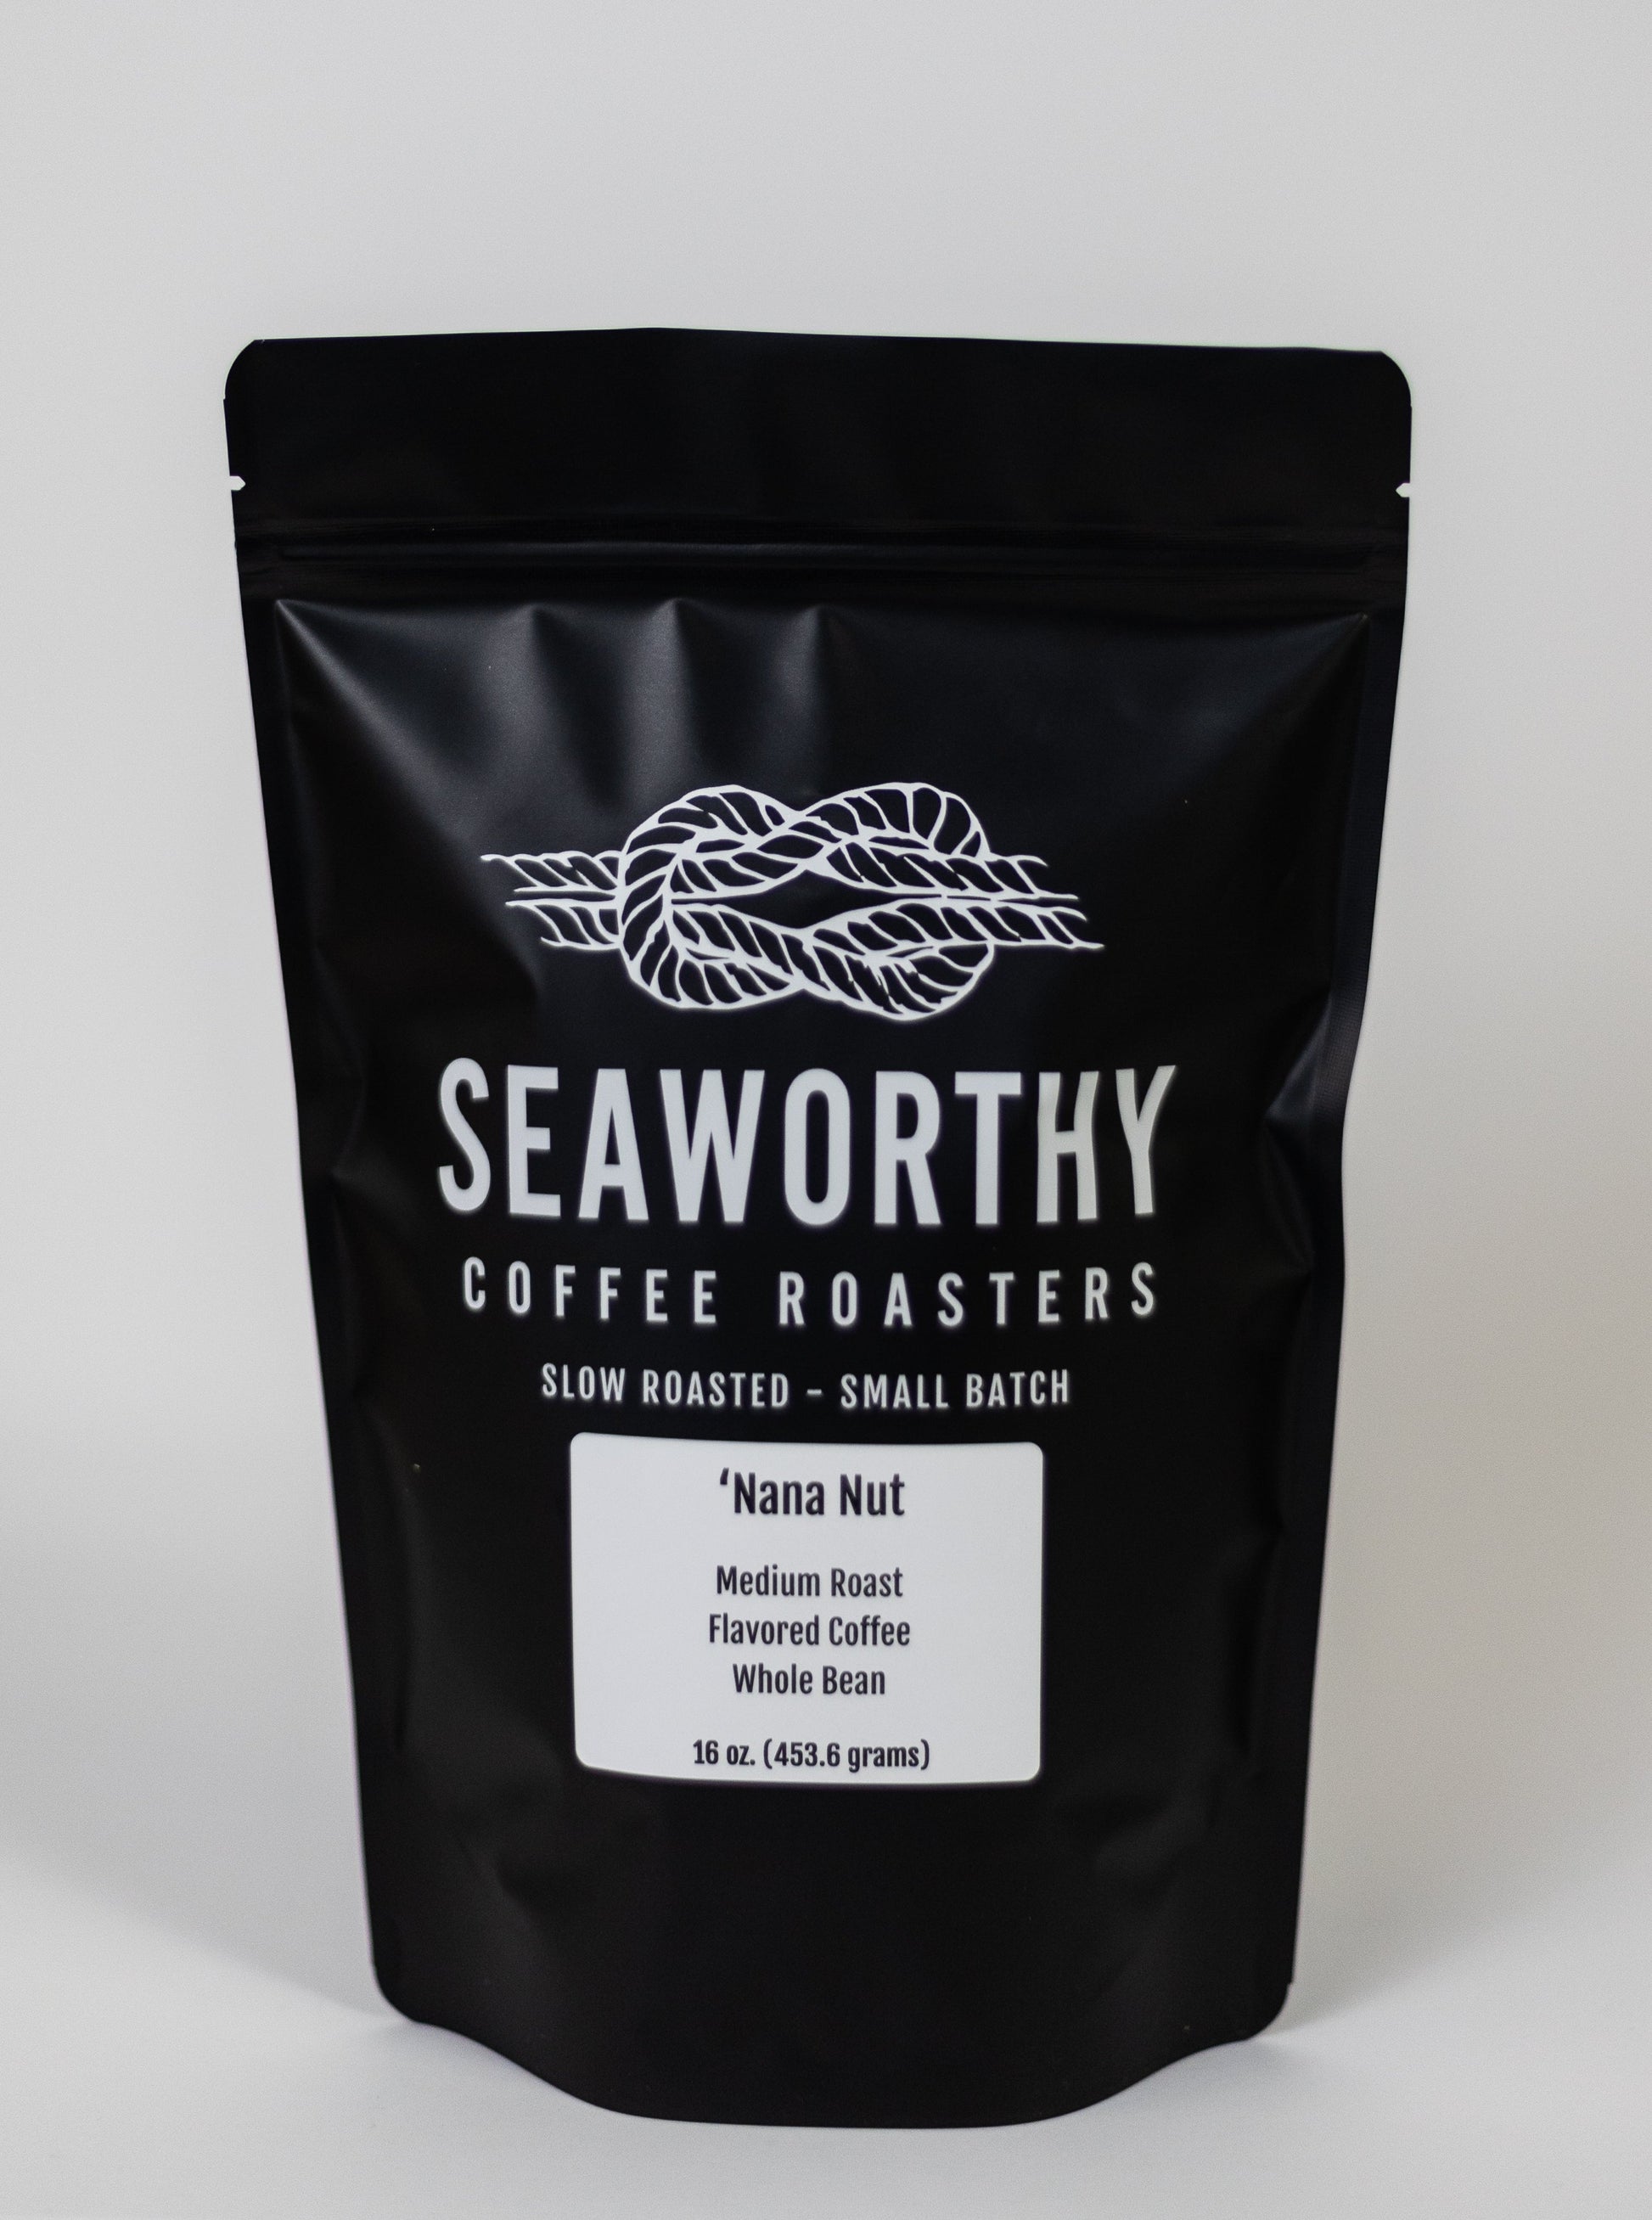 Seaworthy slow roasted, small batch coffee 1 pound bag of Banana Nut flavored coffee.